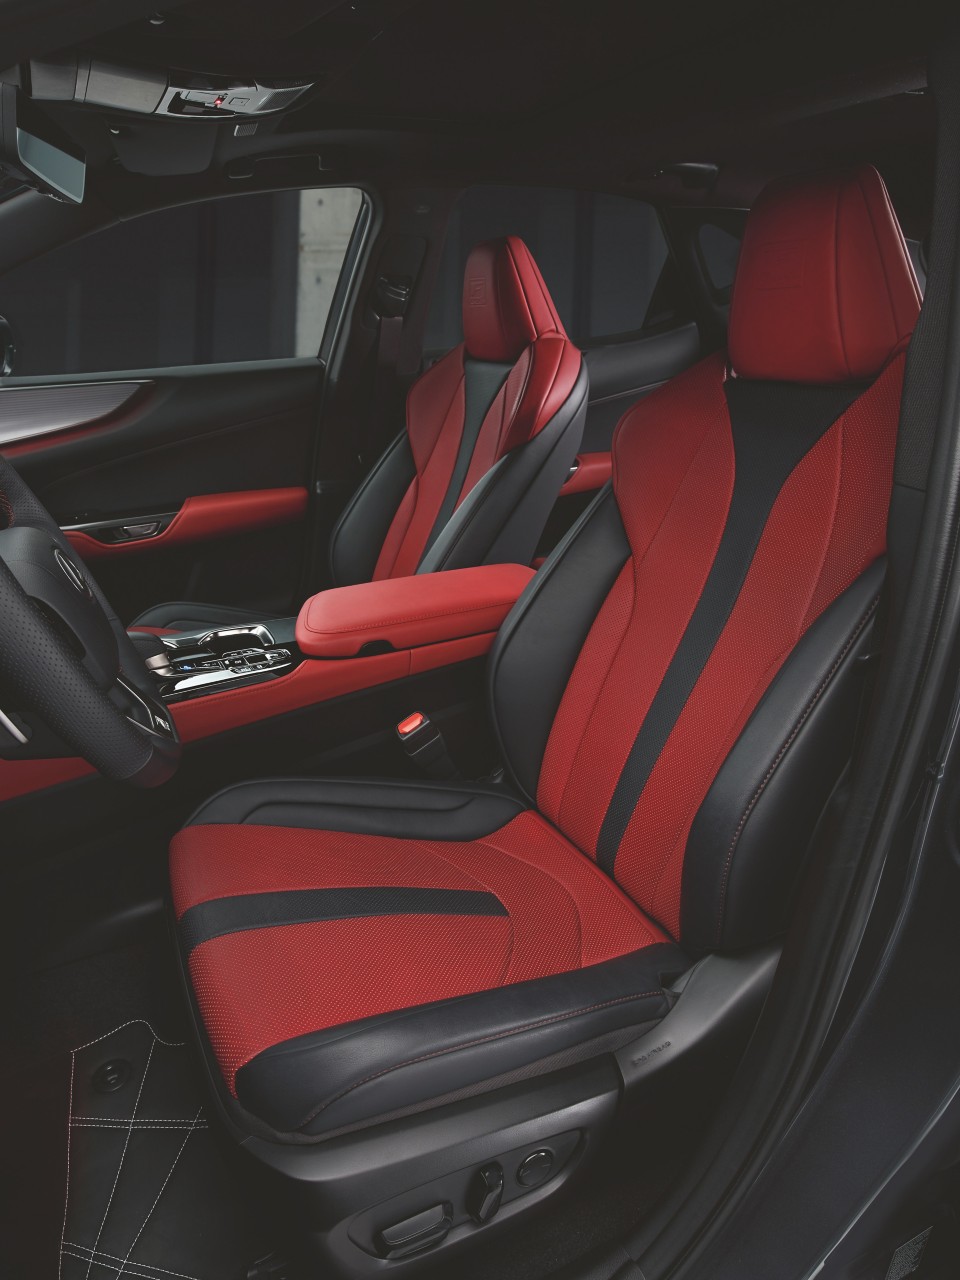 inside a lexus with leather car seats